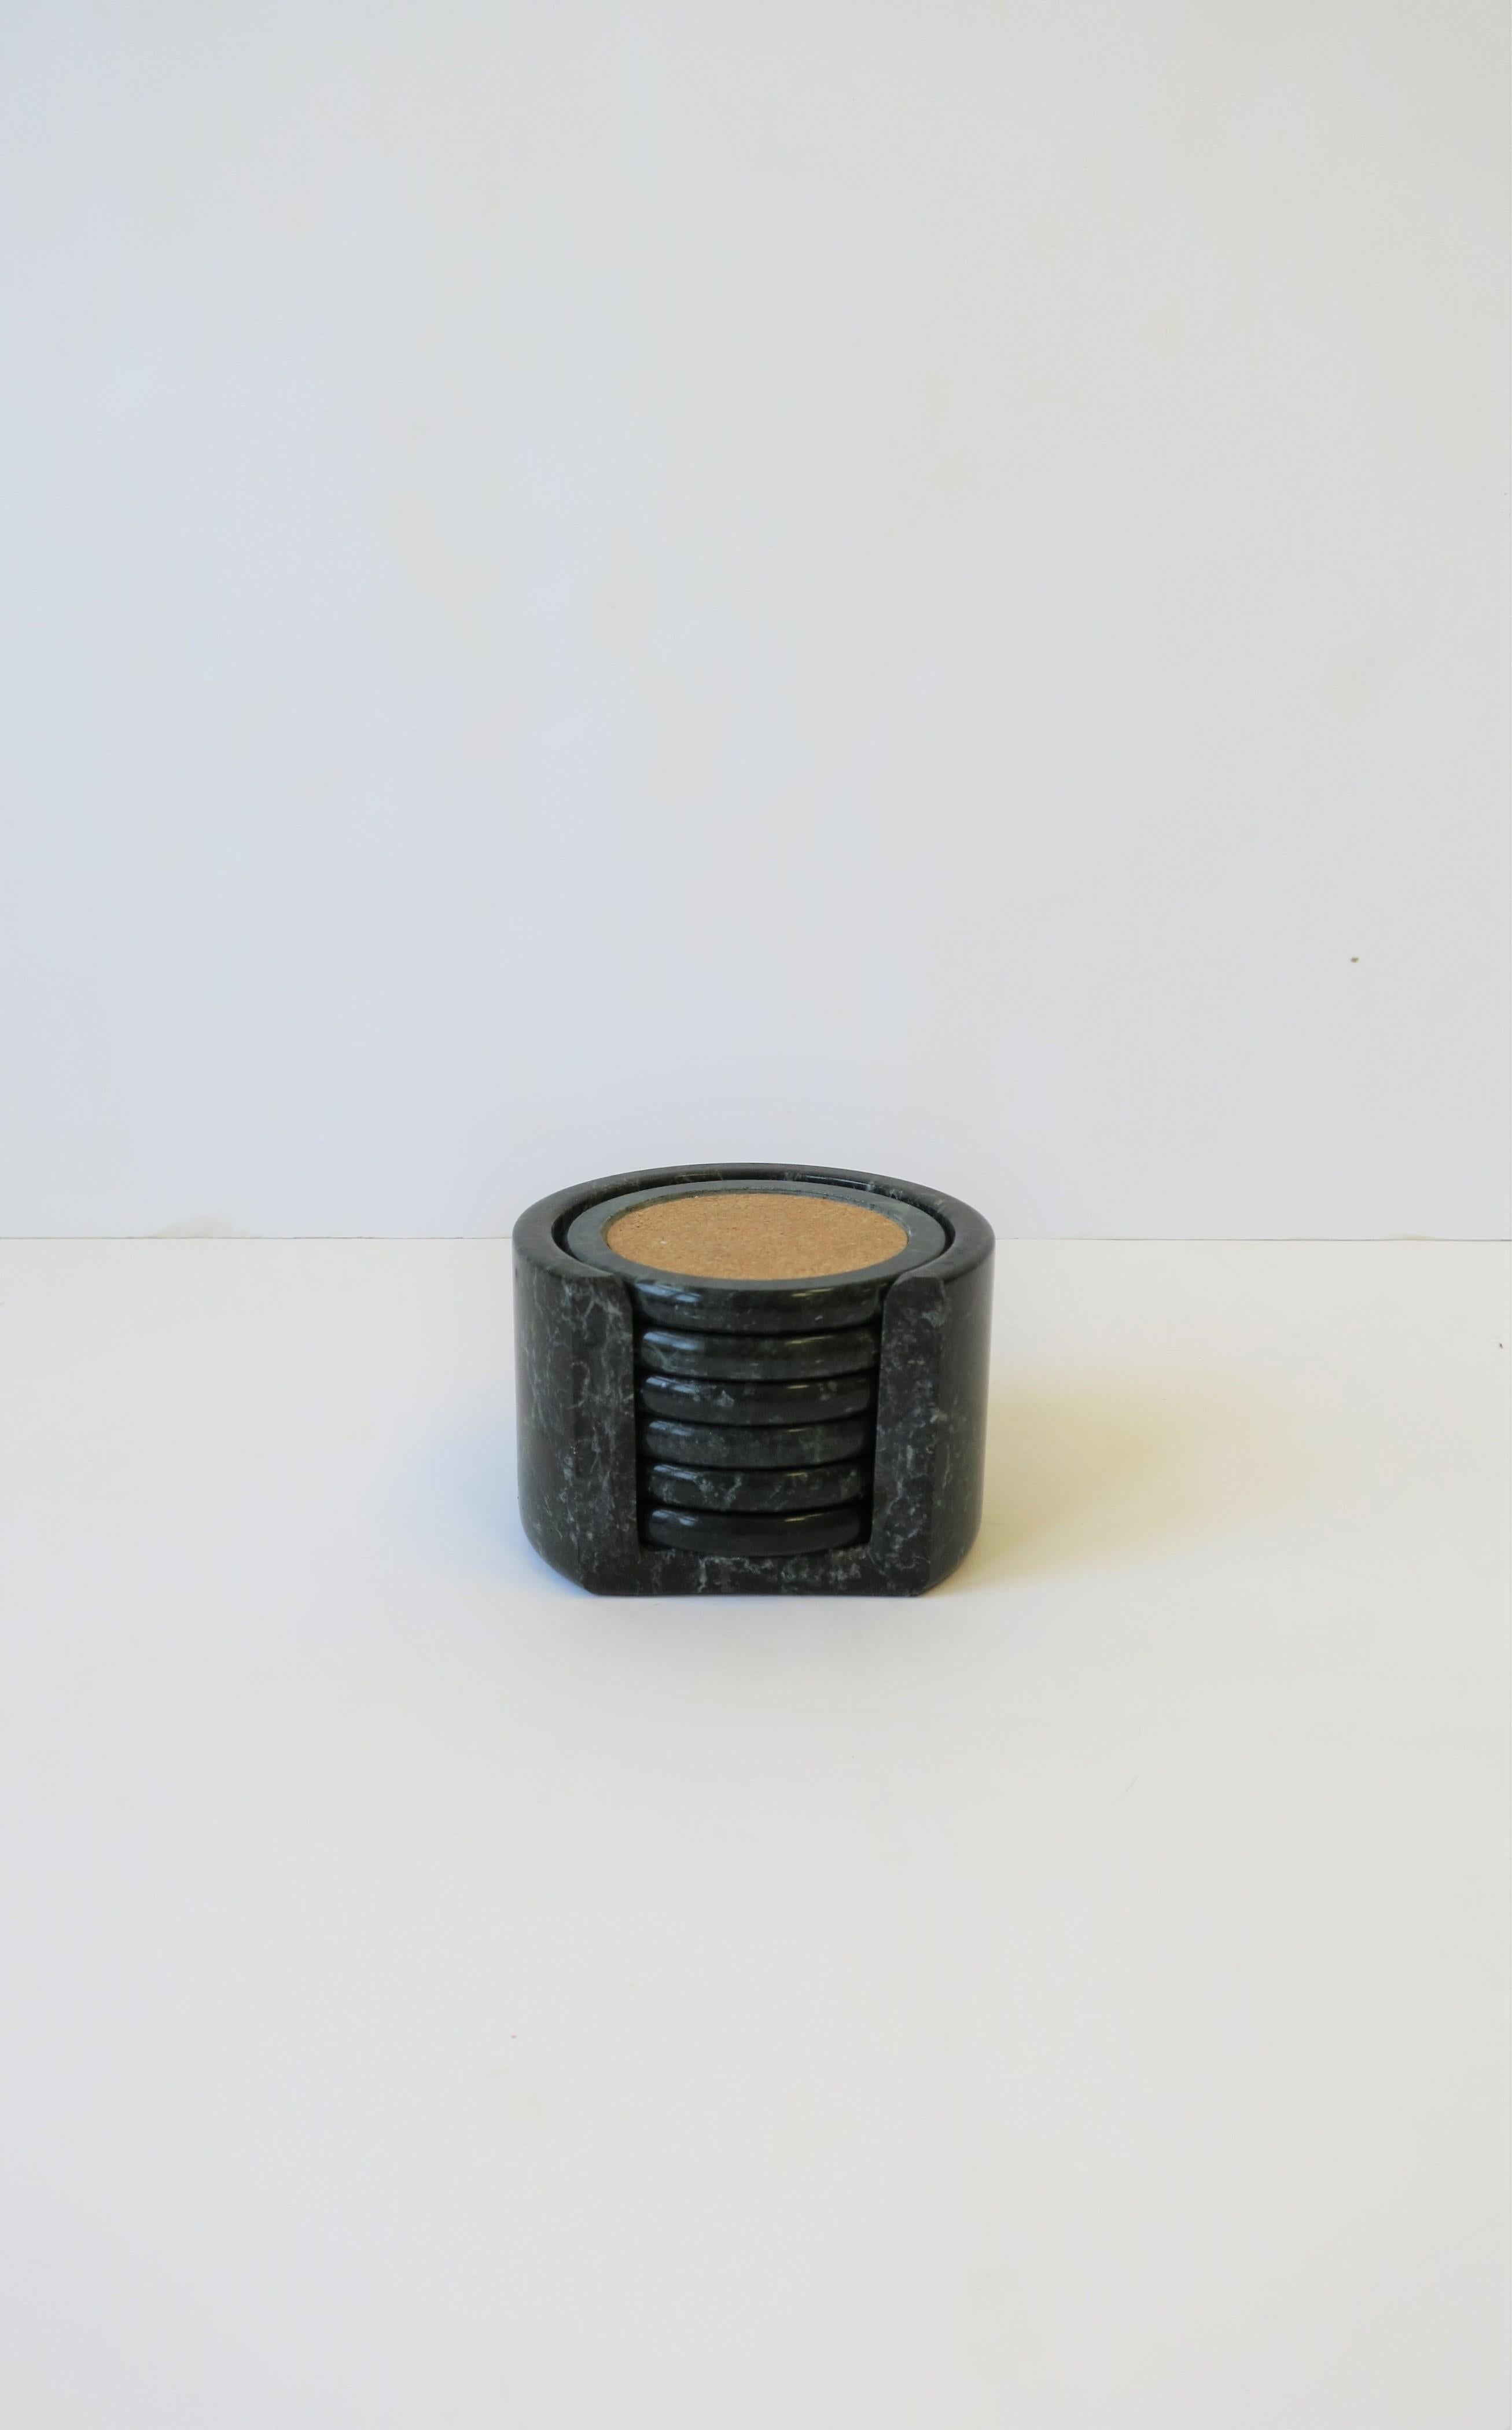 A set of 6 Postmodern dark green and white marble and cork cocktail or drink coaster set with holder vessel. Set includes 6 coasters and one holder vessel.

Measures: 2.78